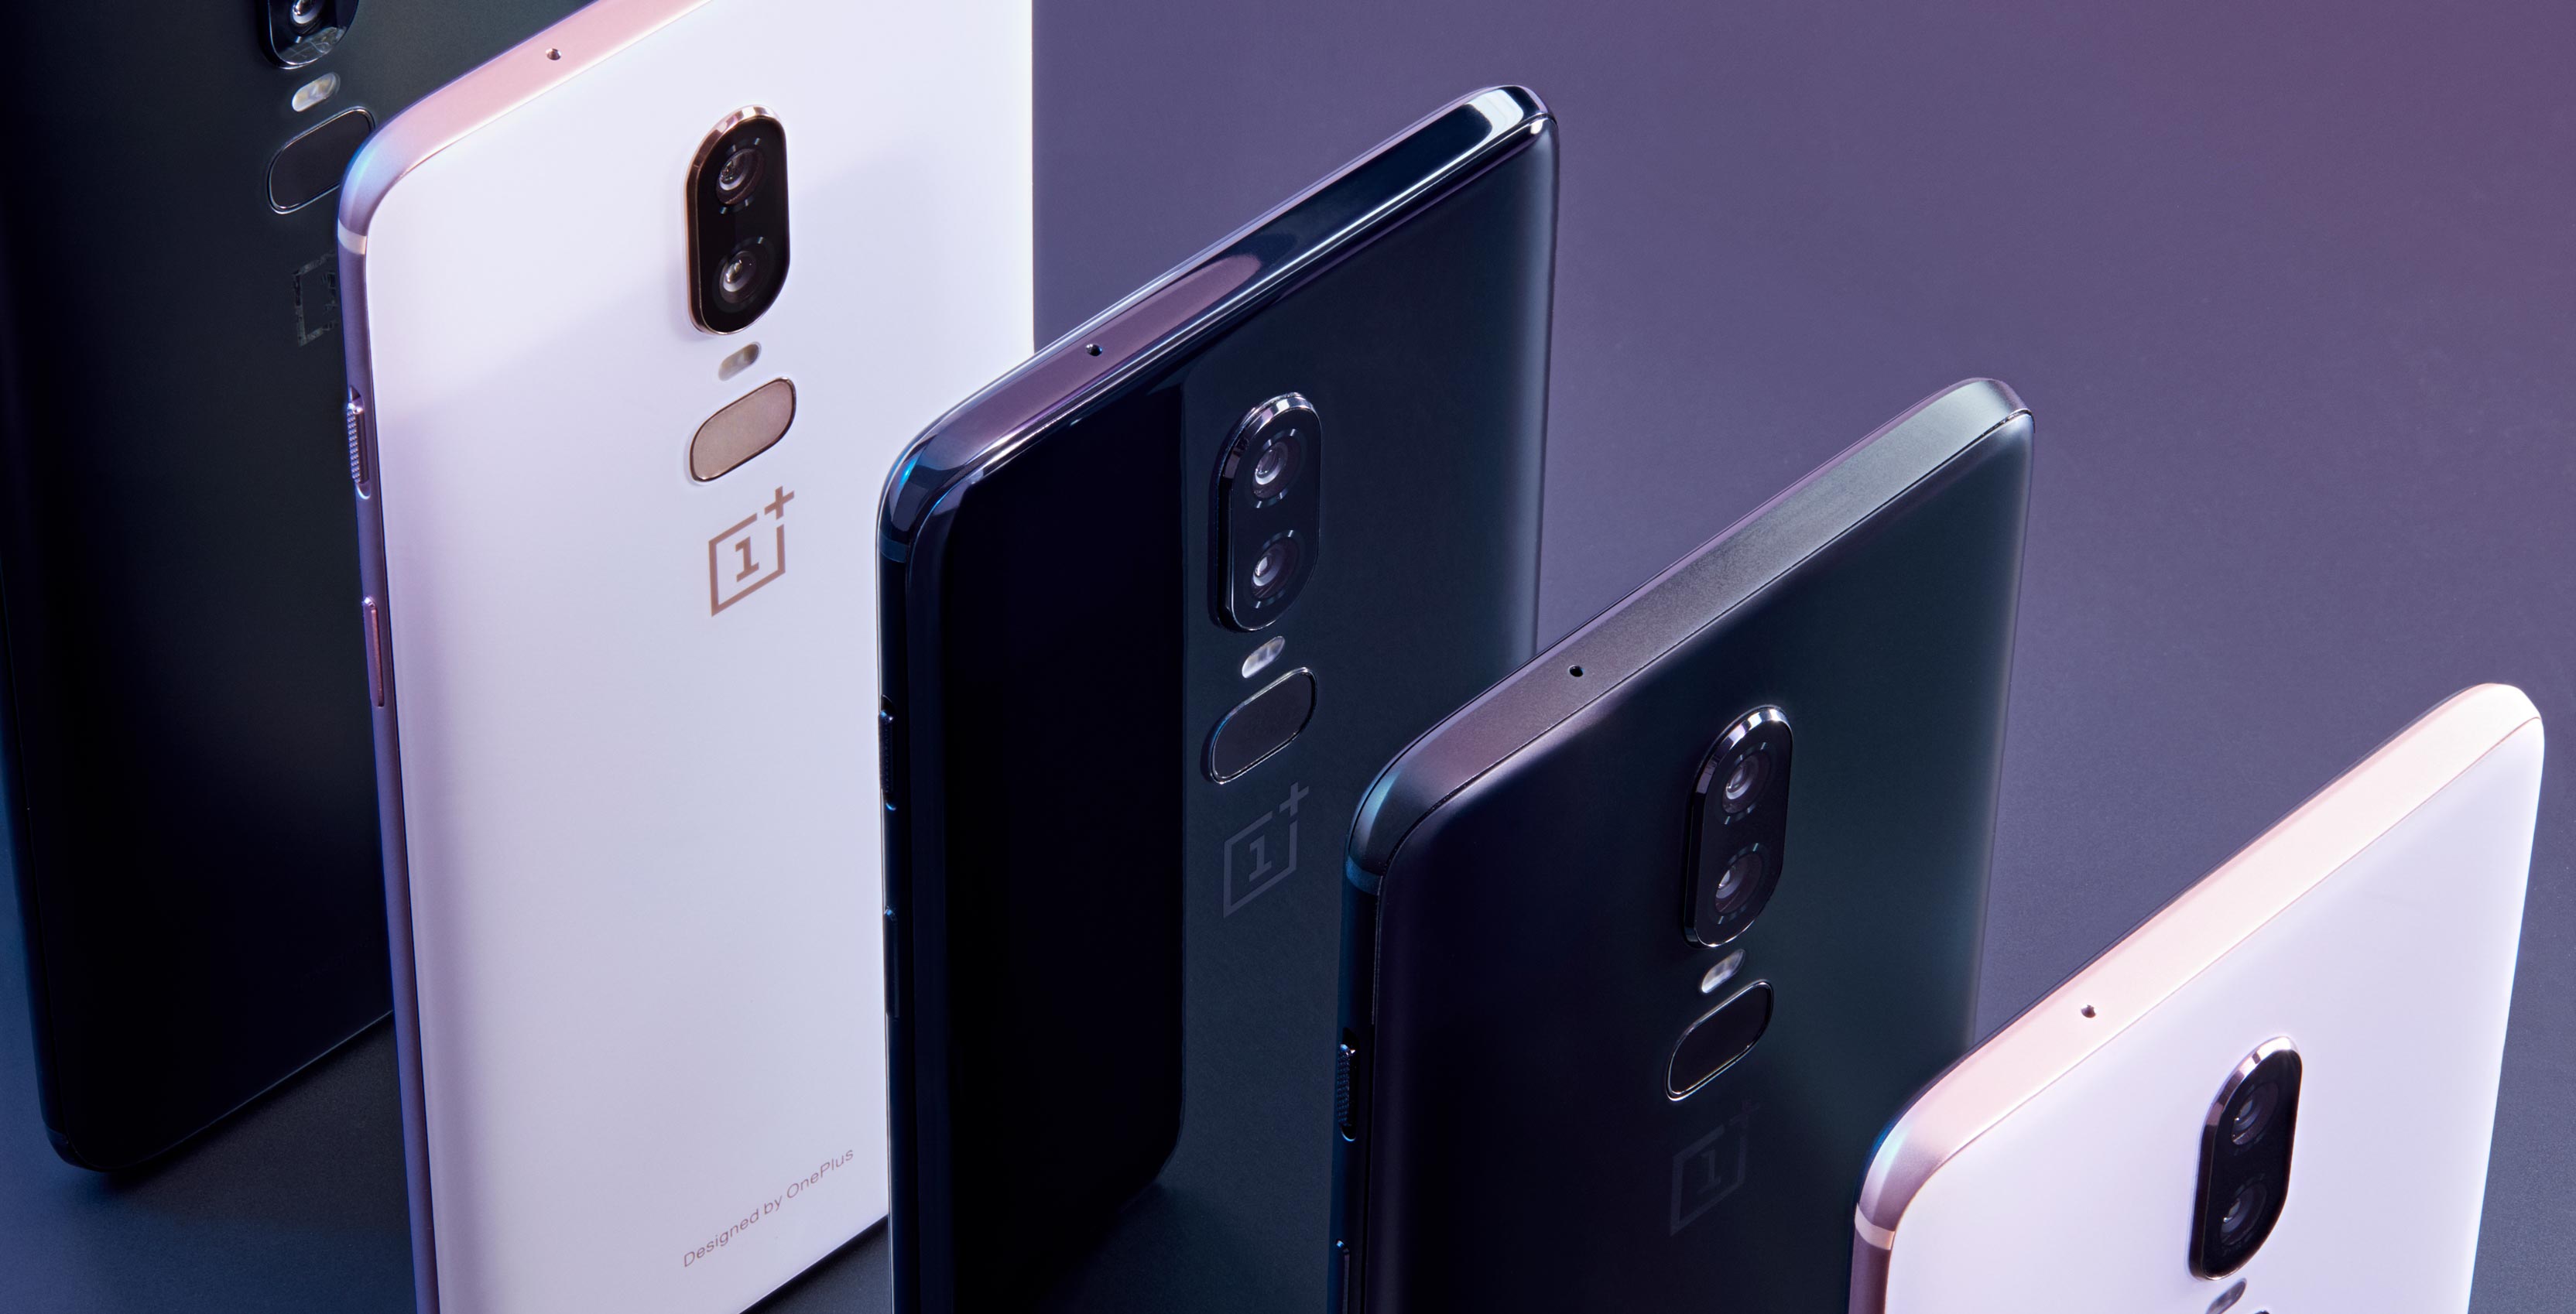 OnePlus 6 devices in a row